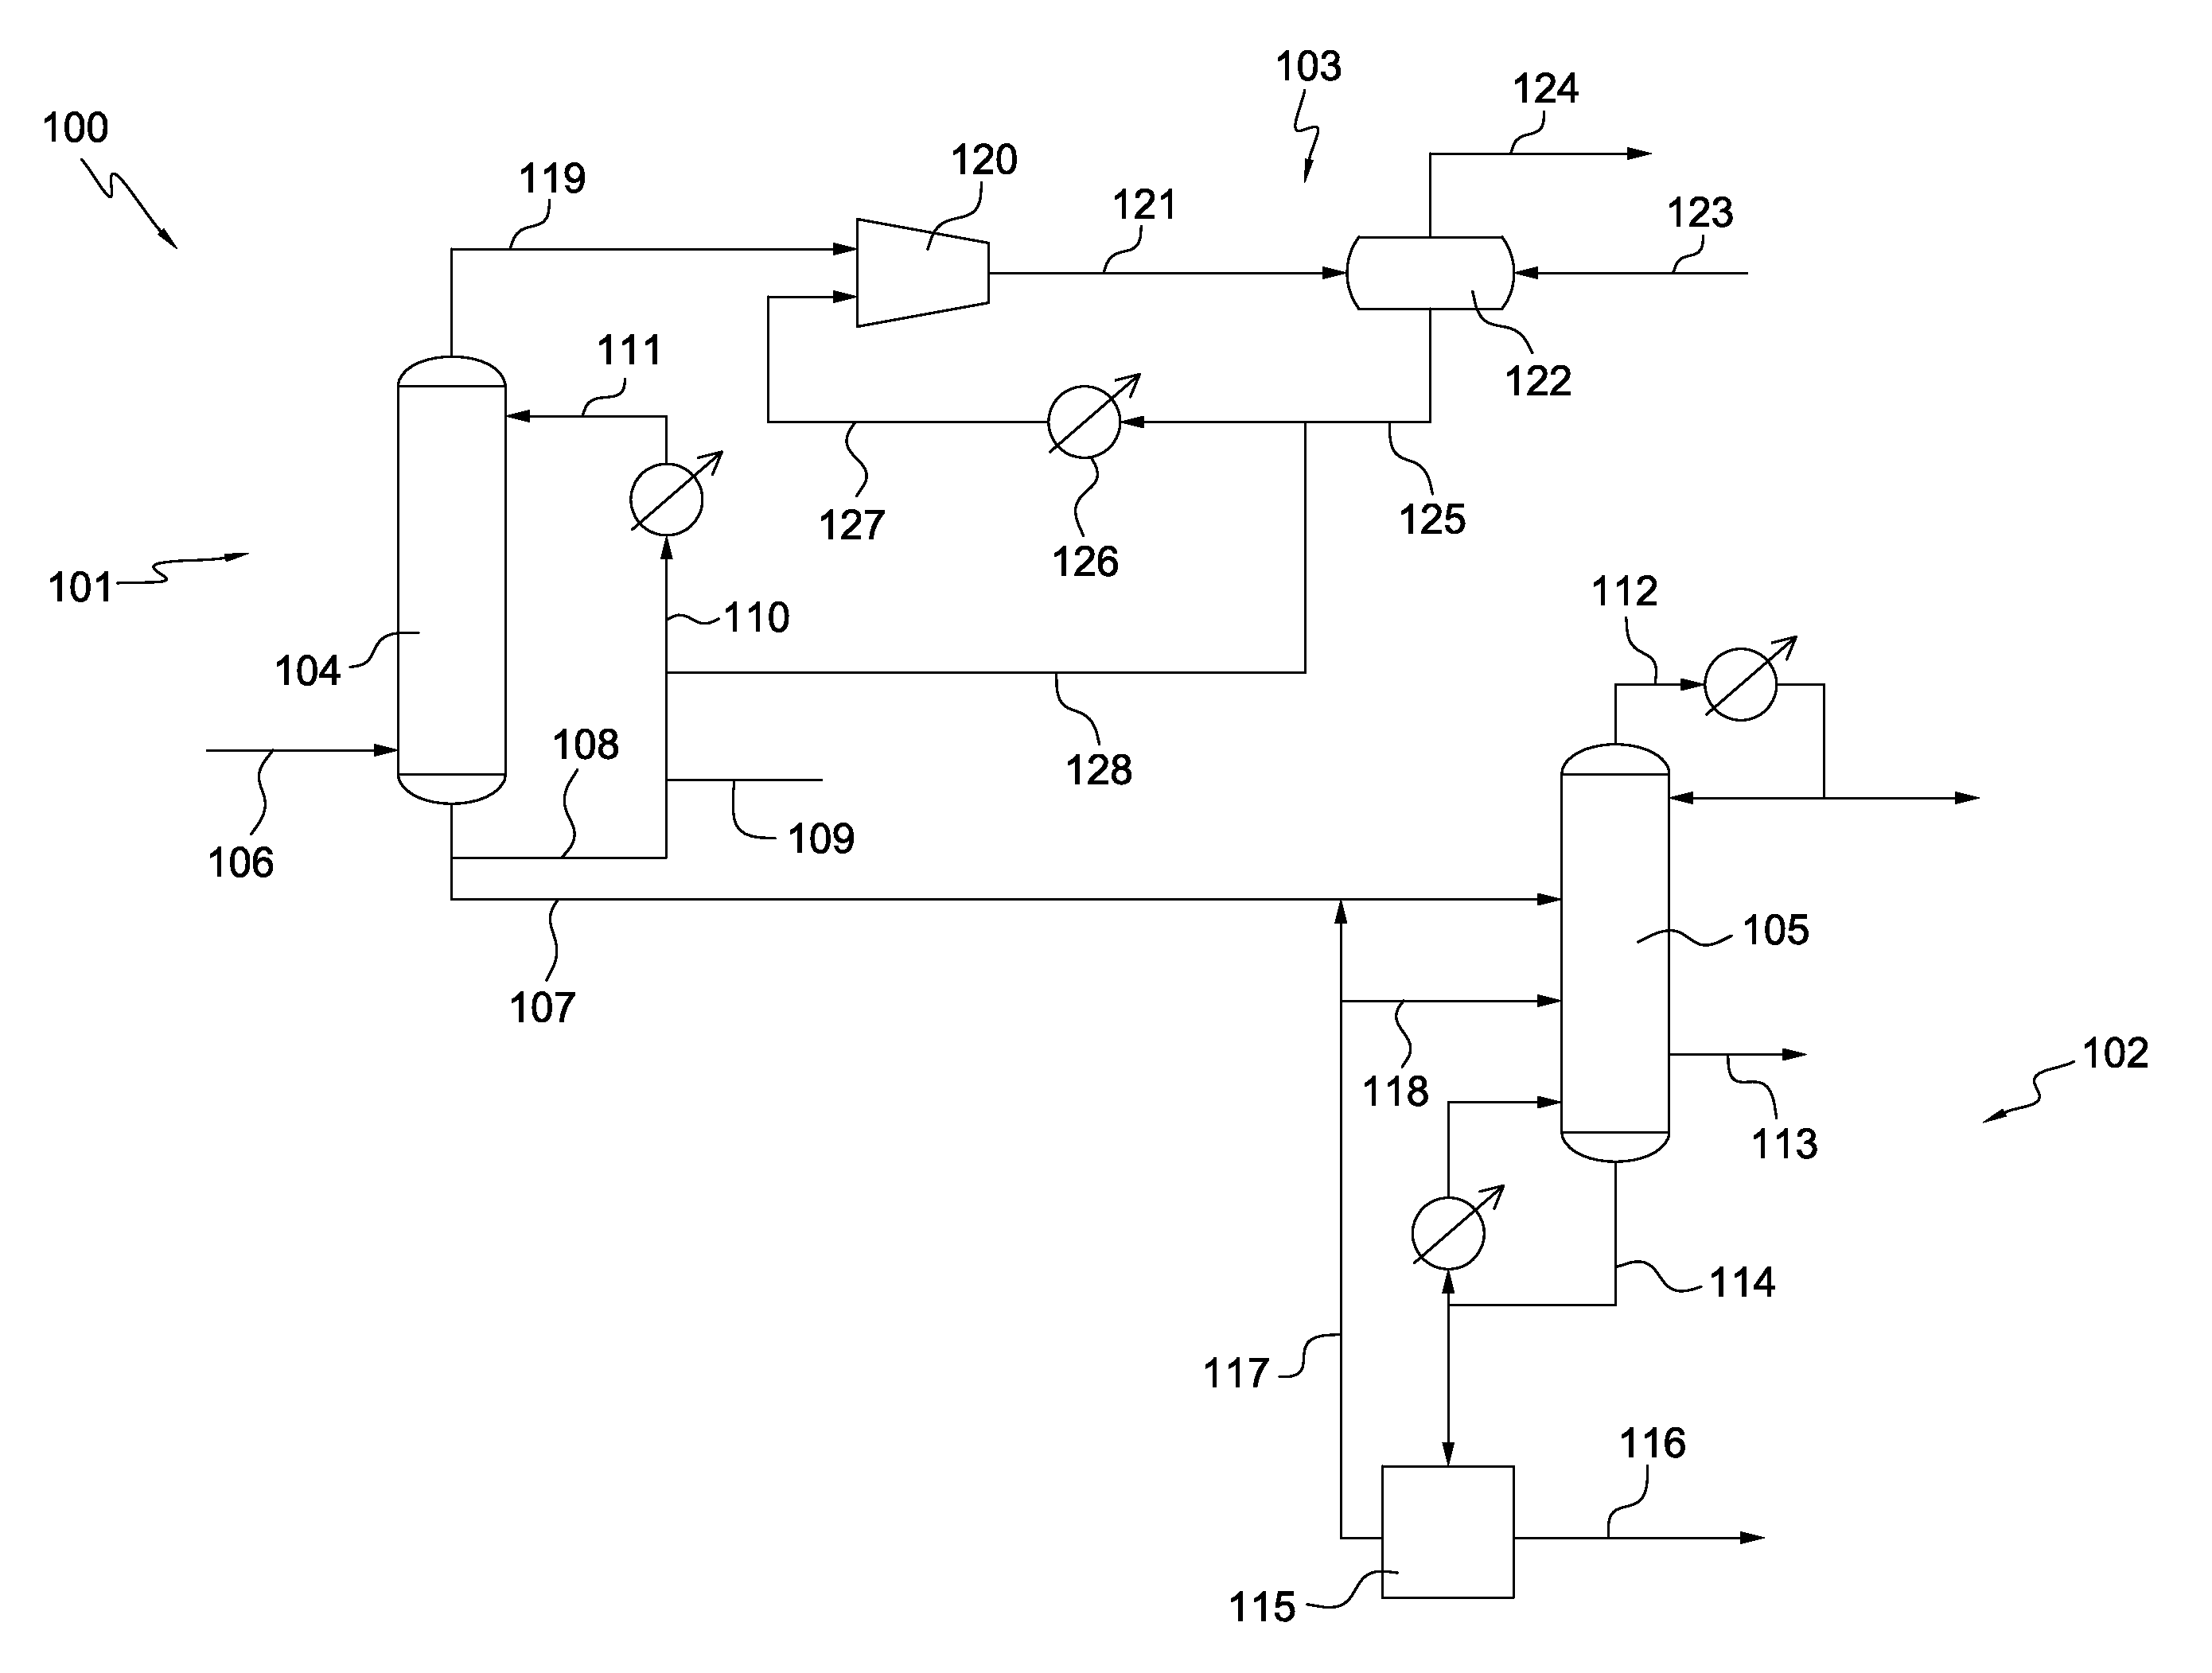 Processes for purifying acetic anhydride